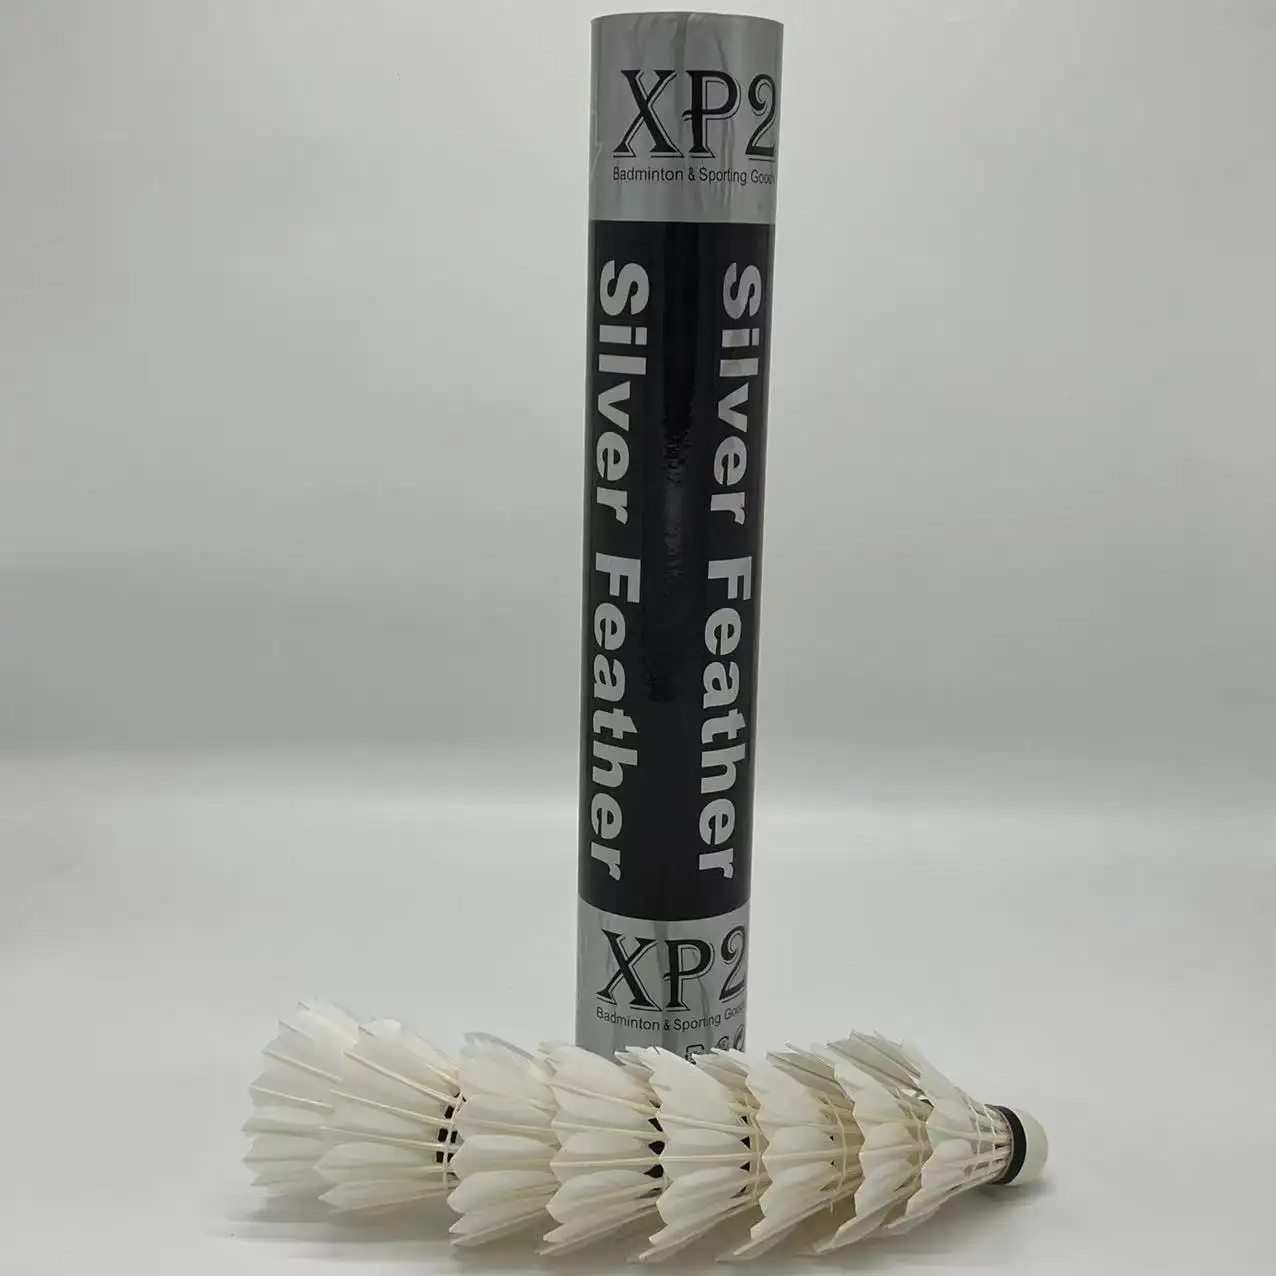 XP2 Brand XP2 Silver Badminton Shuttlecock Durable Goose Feather Badminton Shuttlecock Famous and Popular in the Philippines